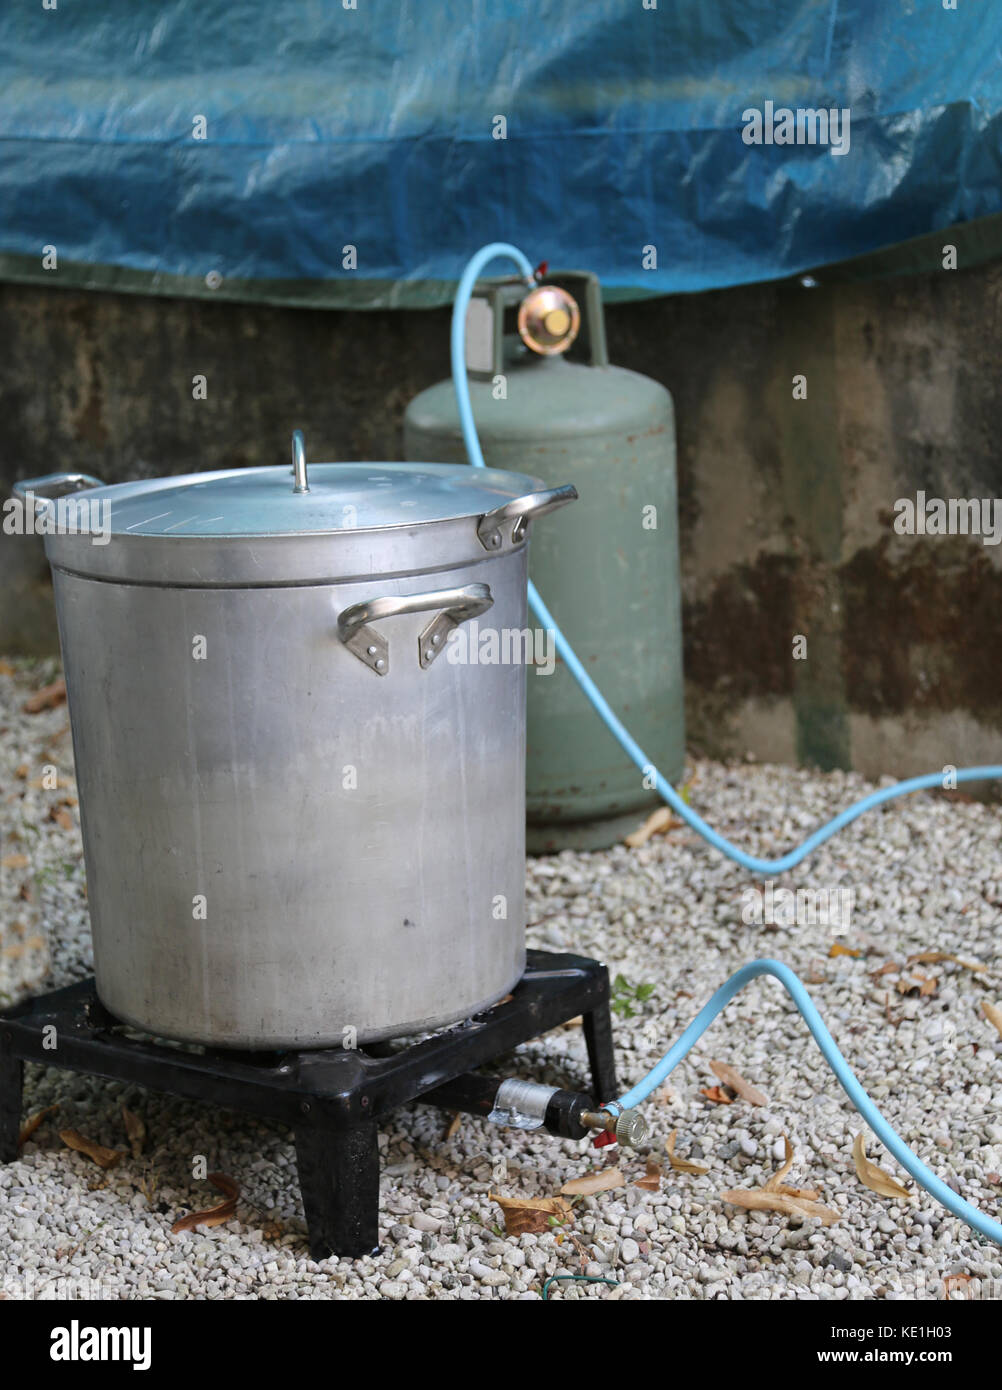 Big aluminum pot with gas canister in the camp kitchen while preparing the meal Stock Photo